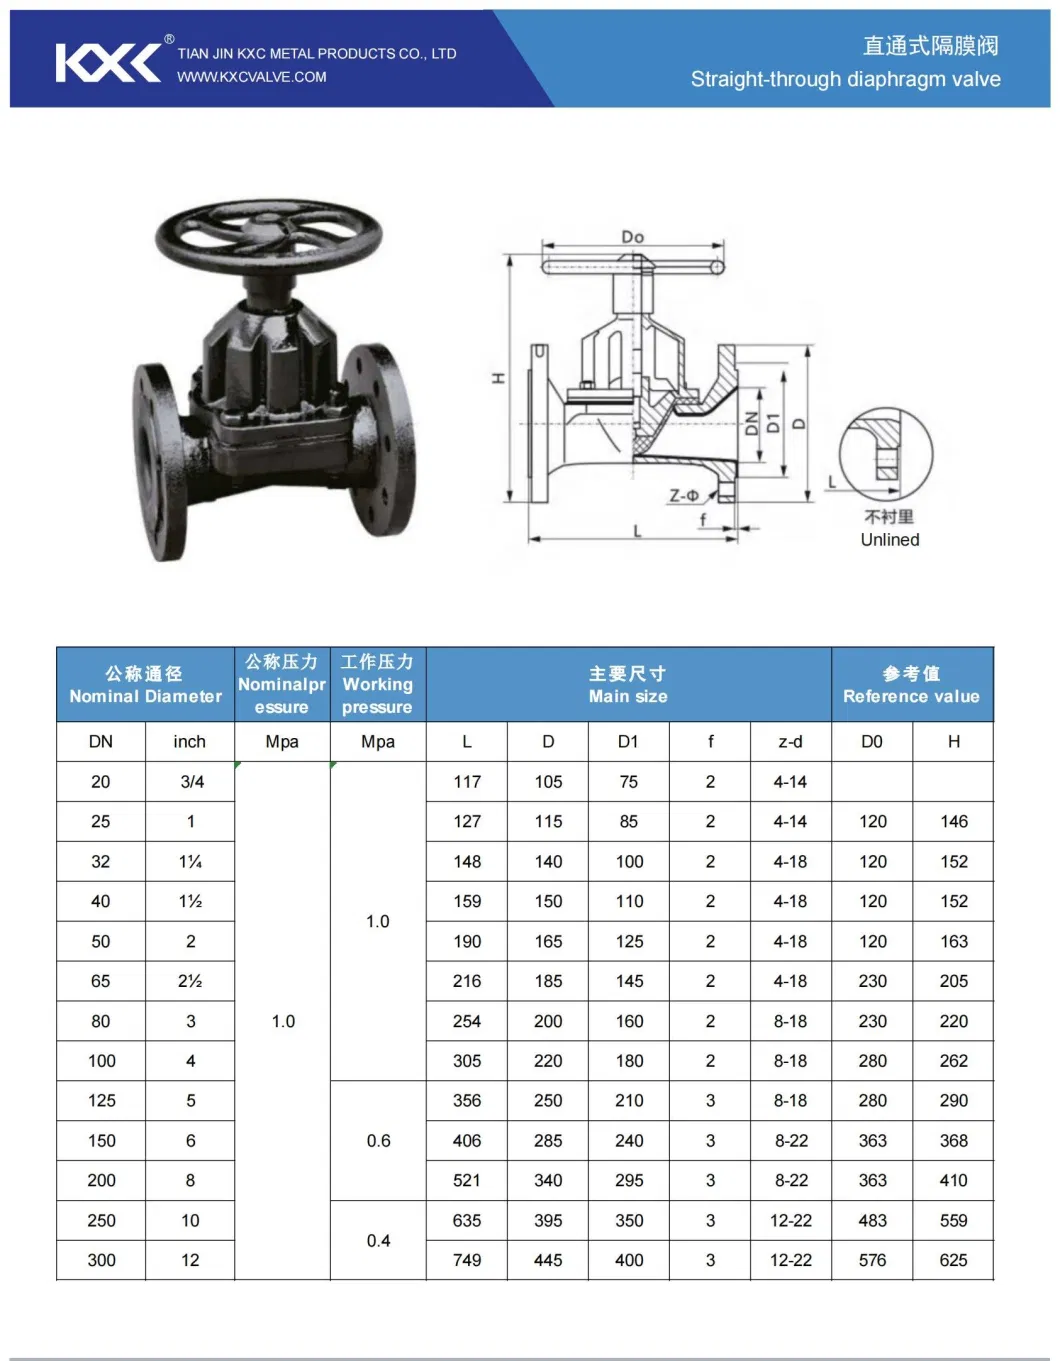 Manual/ Motorized Operated EPDM/NBR/PTFE Lined Di/Wcb Body Diaphragm Valve